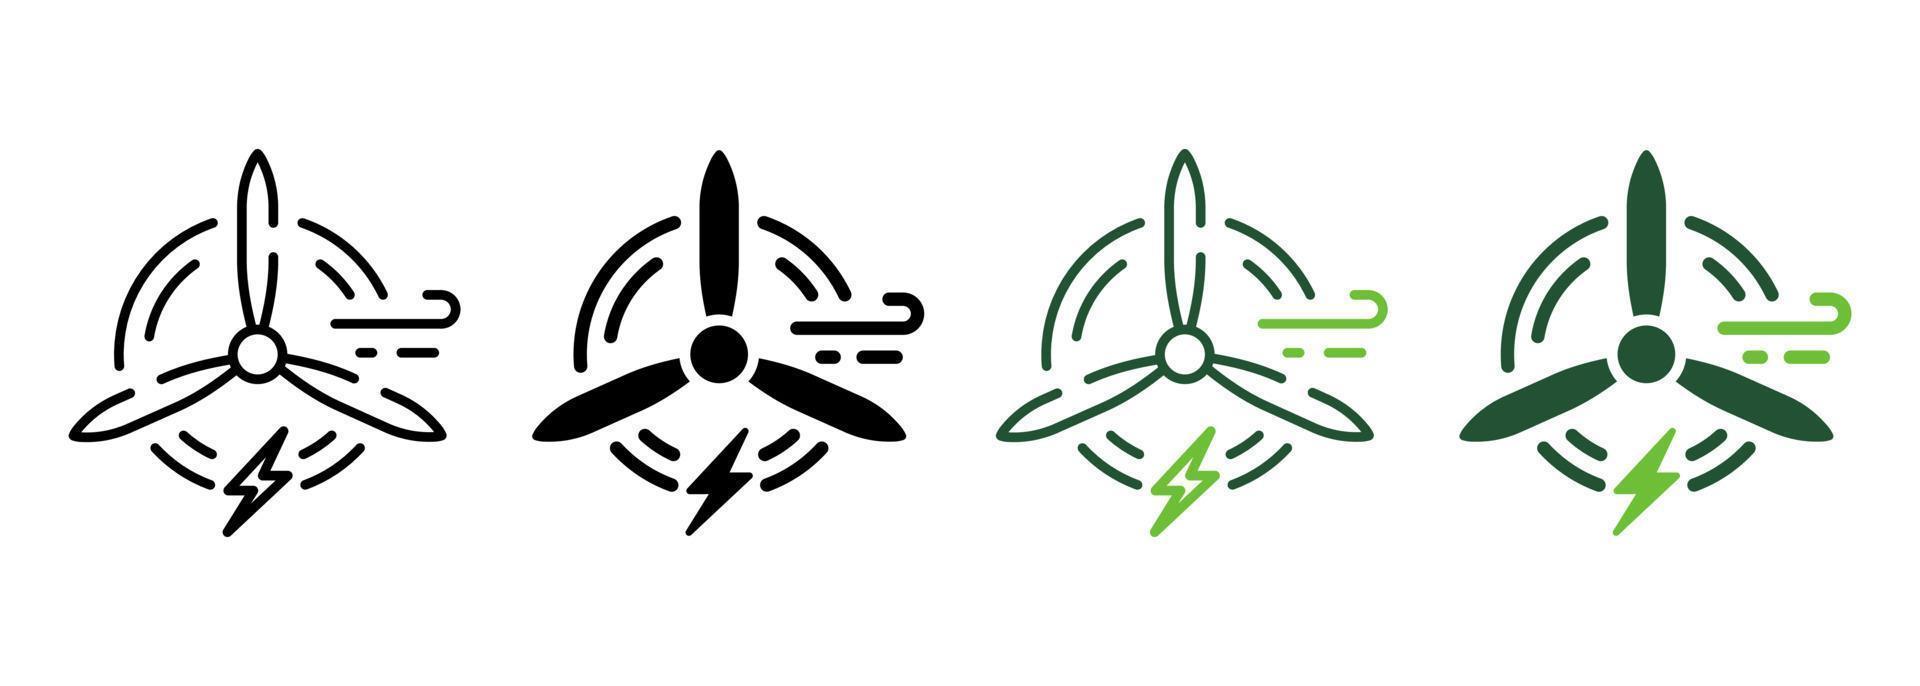 Eco Wind Turbine Green Energy Line and Silhouette Icon Color Set. Wind Mill Renewable Power Pictogram. Ecological Windmill Symbol Collection on White Background. Isolated Vector Illustration.